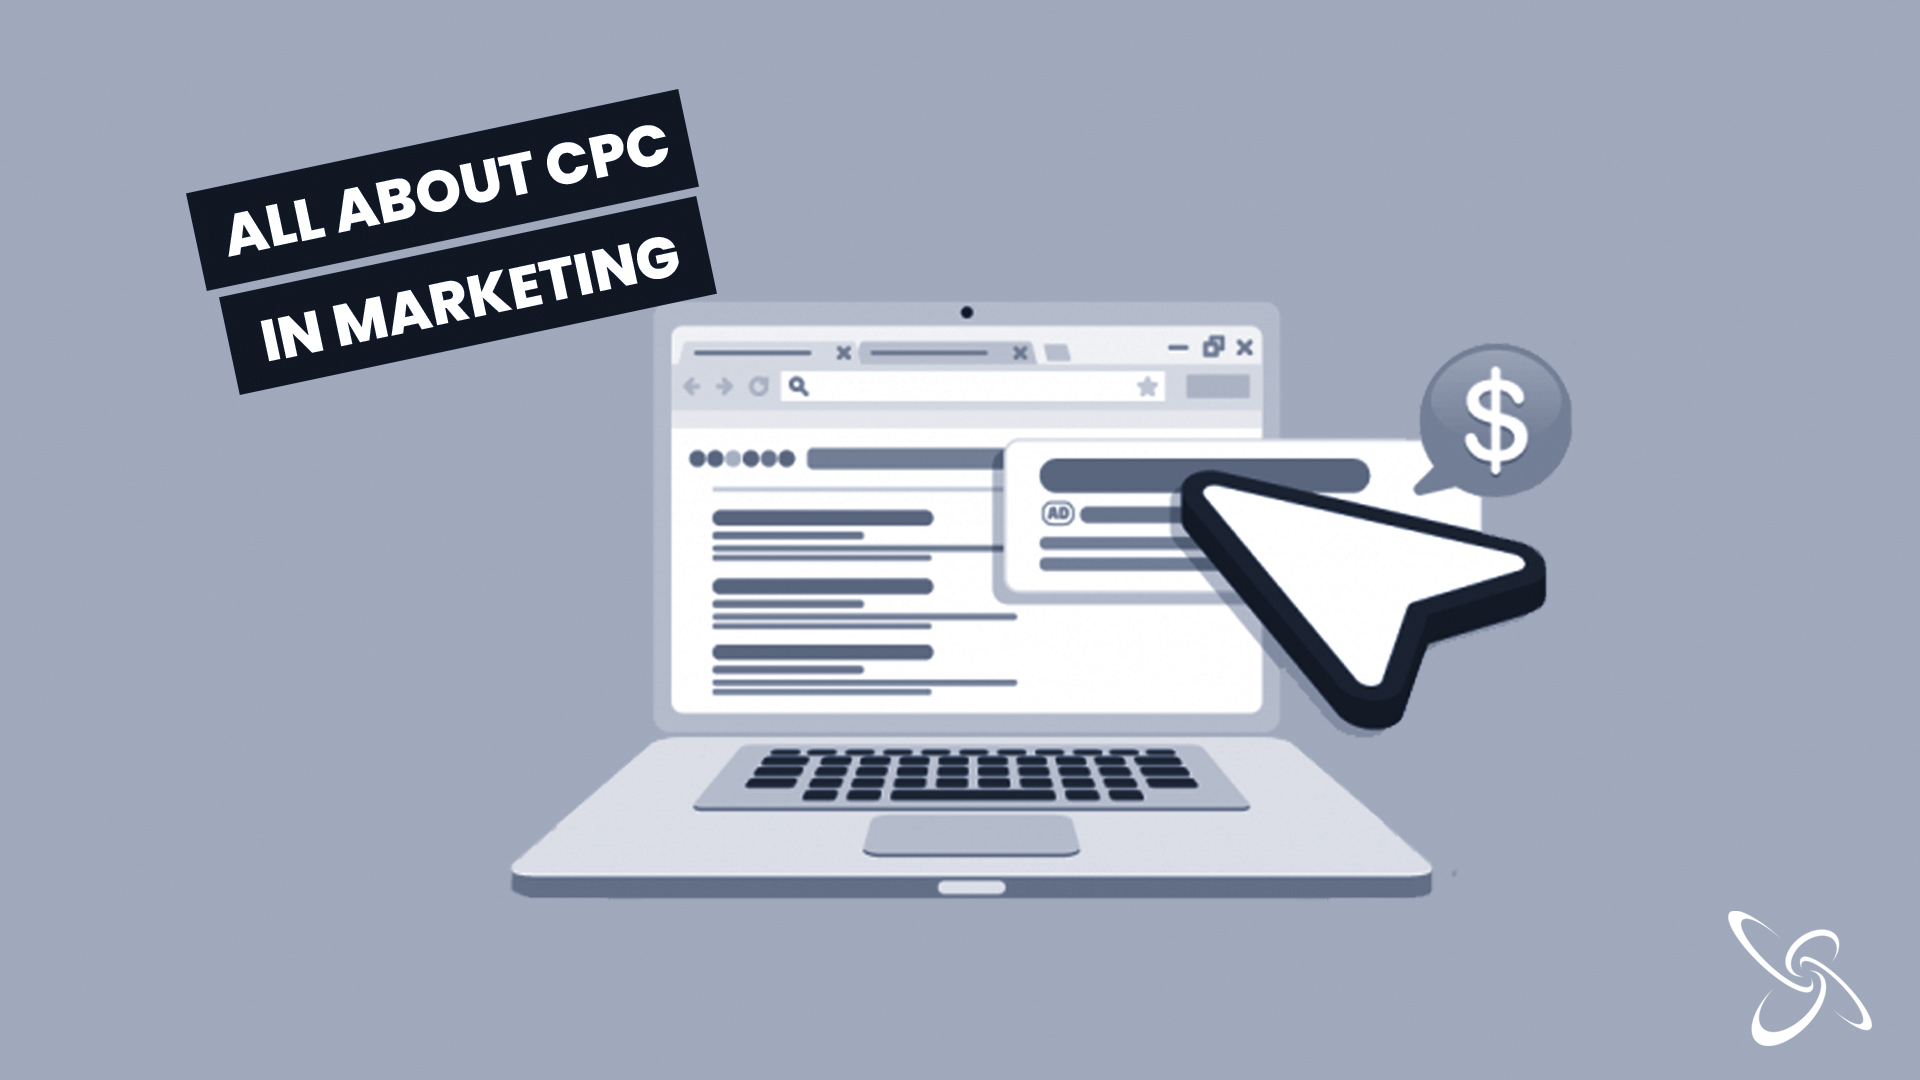 all about CPC in marketing